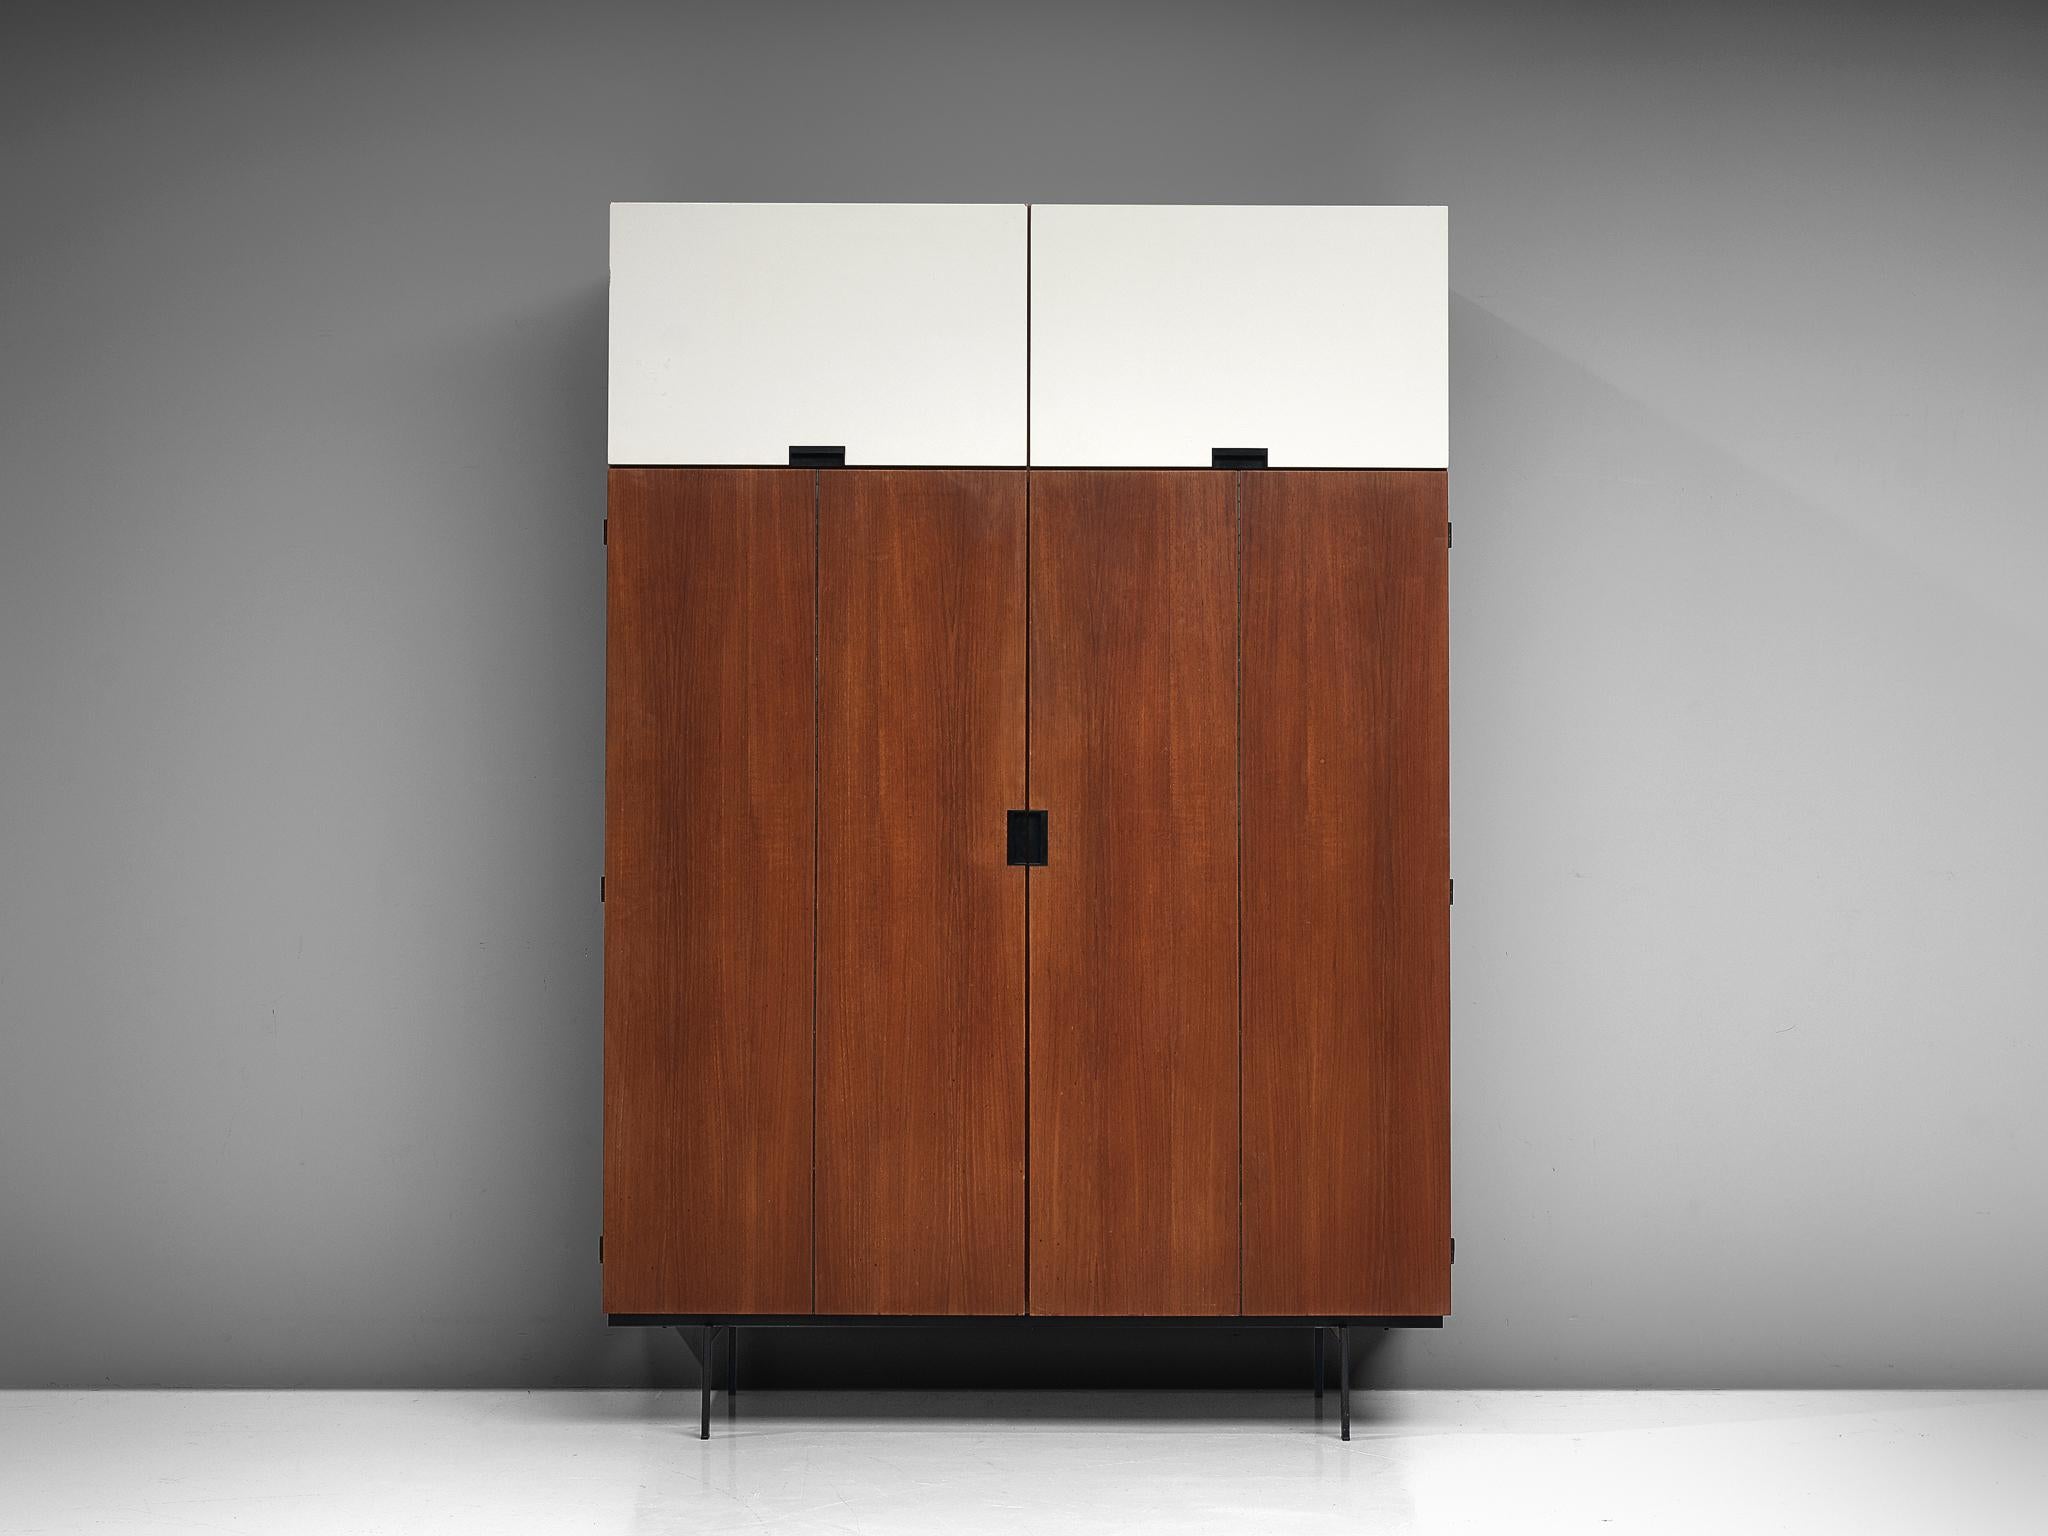 Cees Braakman for UMS Pastoe, teak and metal, Netherlands, design 1958, production 1960s. 

This highboard is designed by Cees Braakman, and is from his Japanese Series for Pastoe.